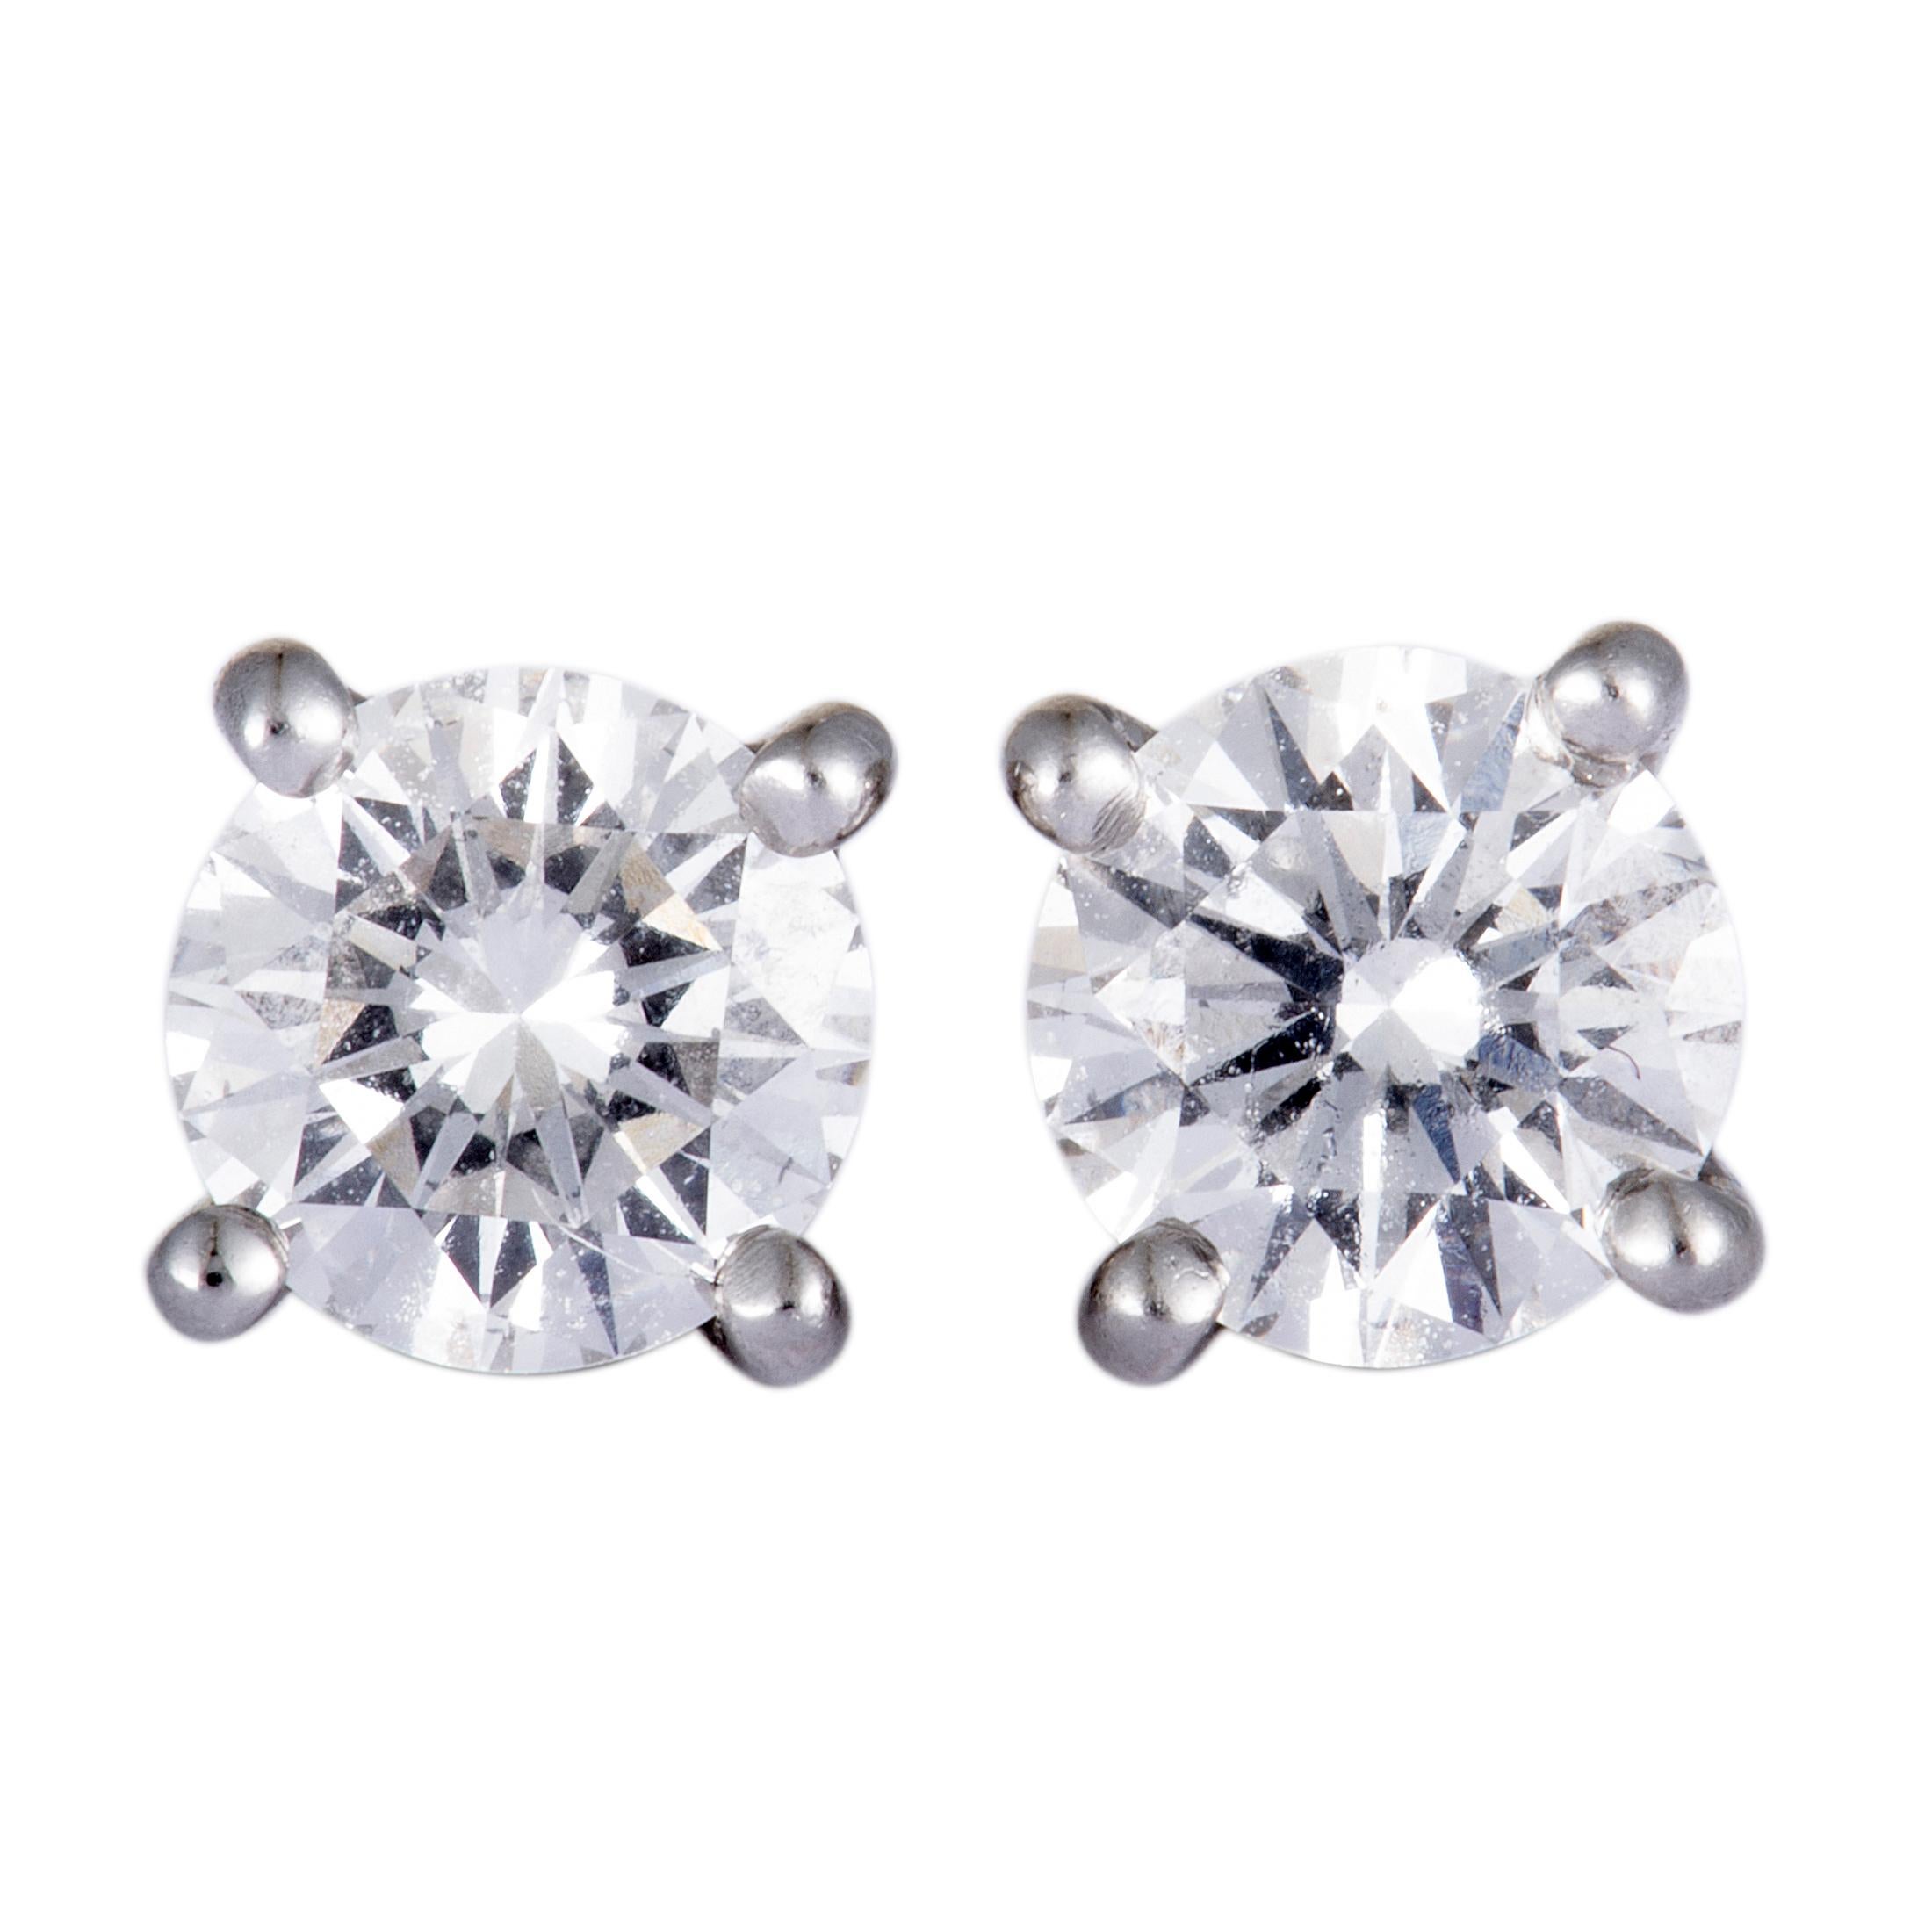 These extraordinary Tiffany & Co. earrings are ingeniously designed in a way that allows you to wear them as simple, understated studs that will accentuate your look in a delightfully elegant manner, or combined - as incredibly stylish yet